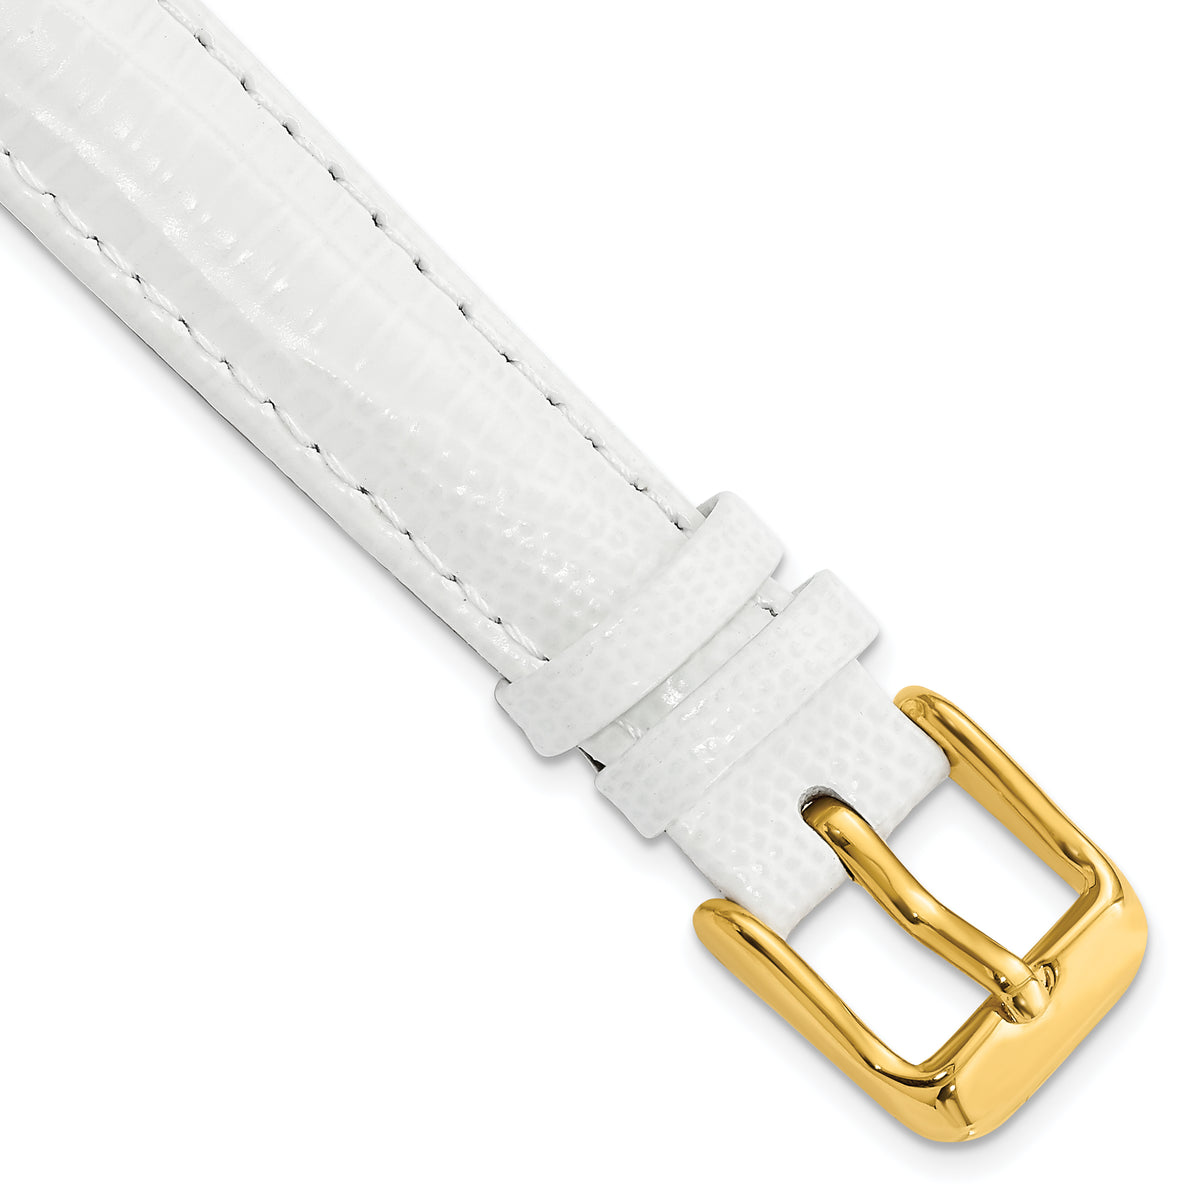 DeBeer 14mm White Teju Liz Grain Leather with Gold-tone Buckle 6.75 inch Watch Band